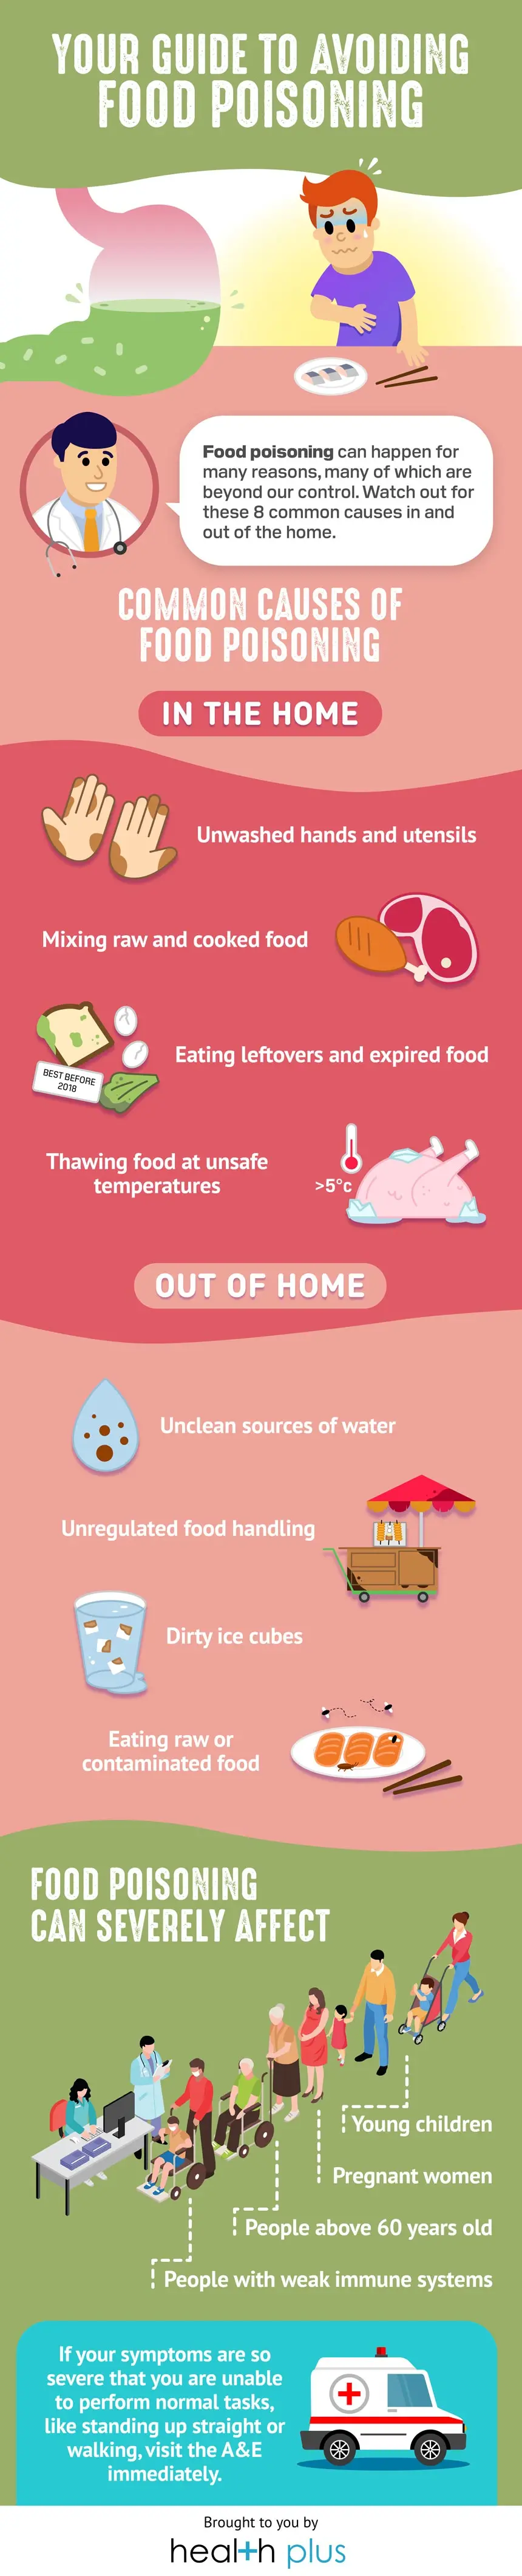 Guide to food poisoning